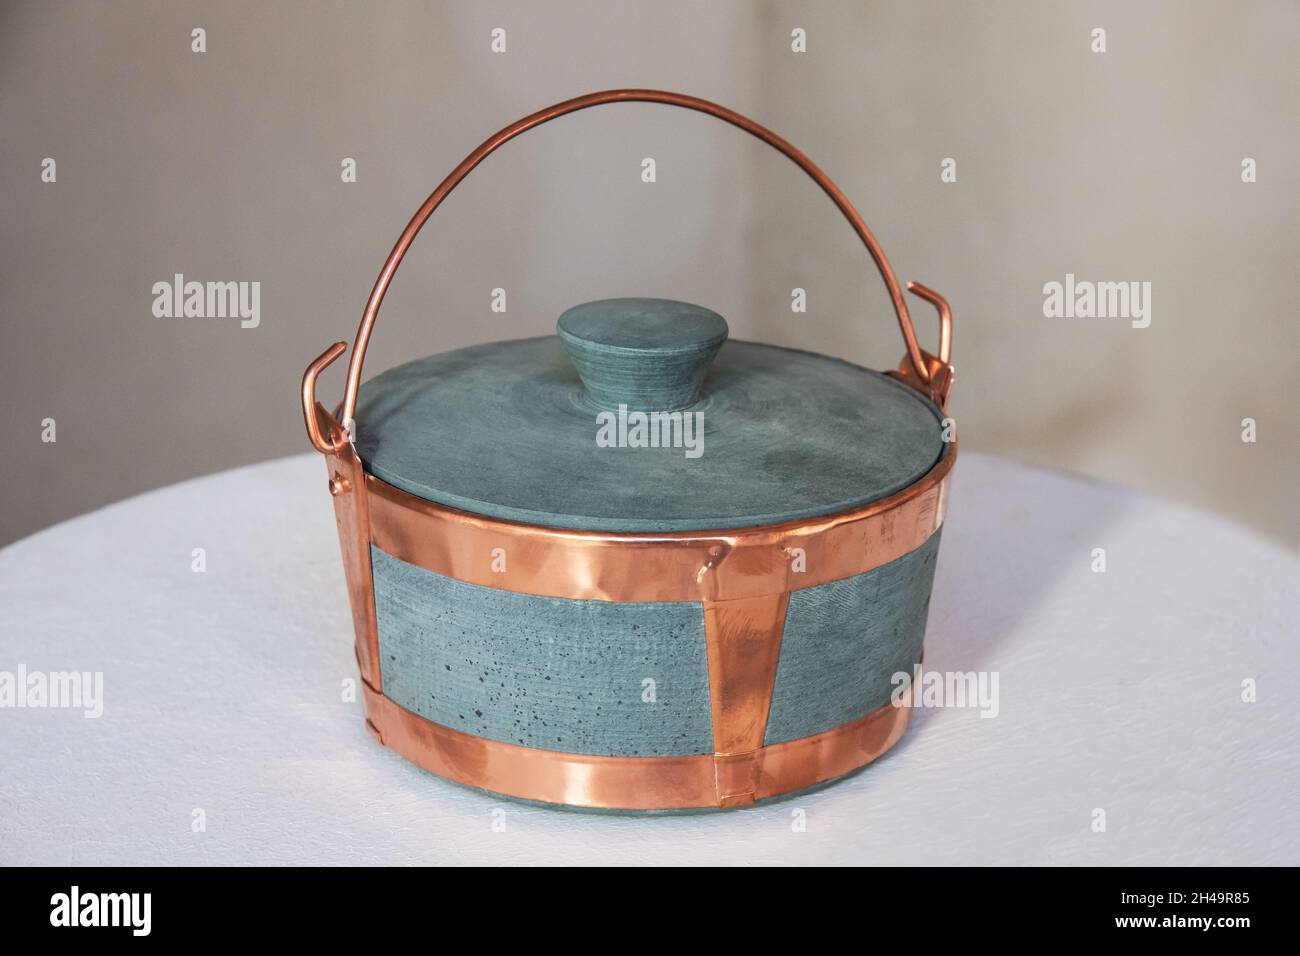 https://c8.alamy.com/comp/2H49R85/pietra-ollare-pot-with-handle-in-copper-2H49R85.jpg